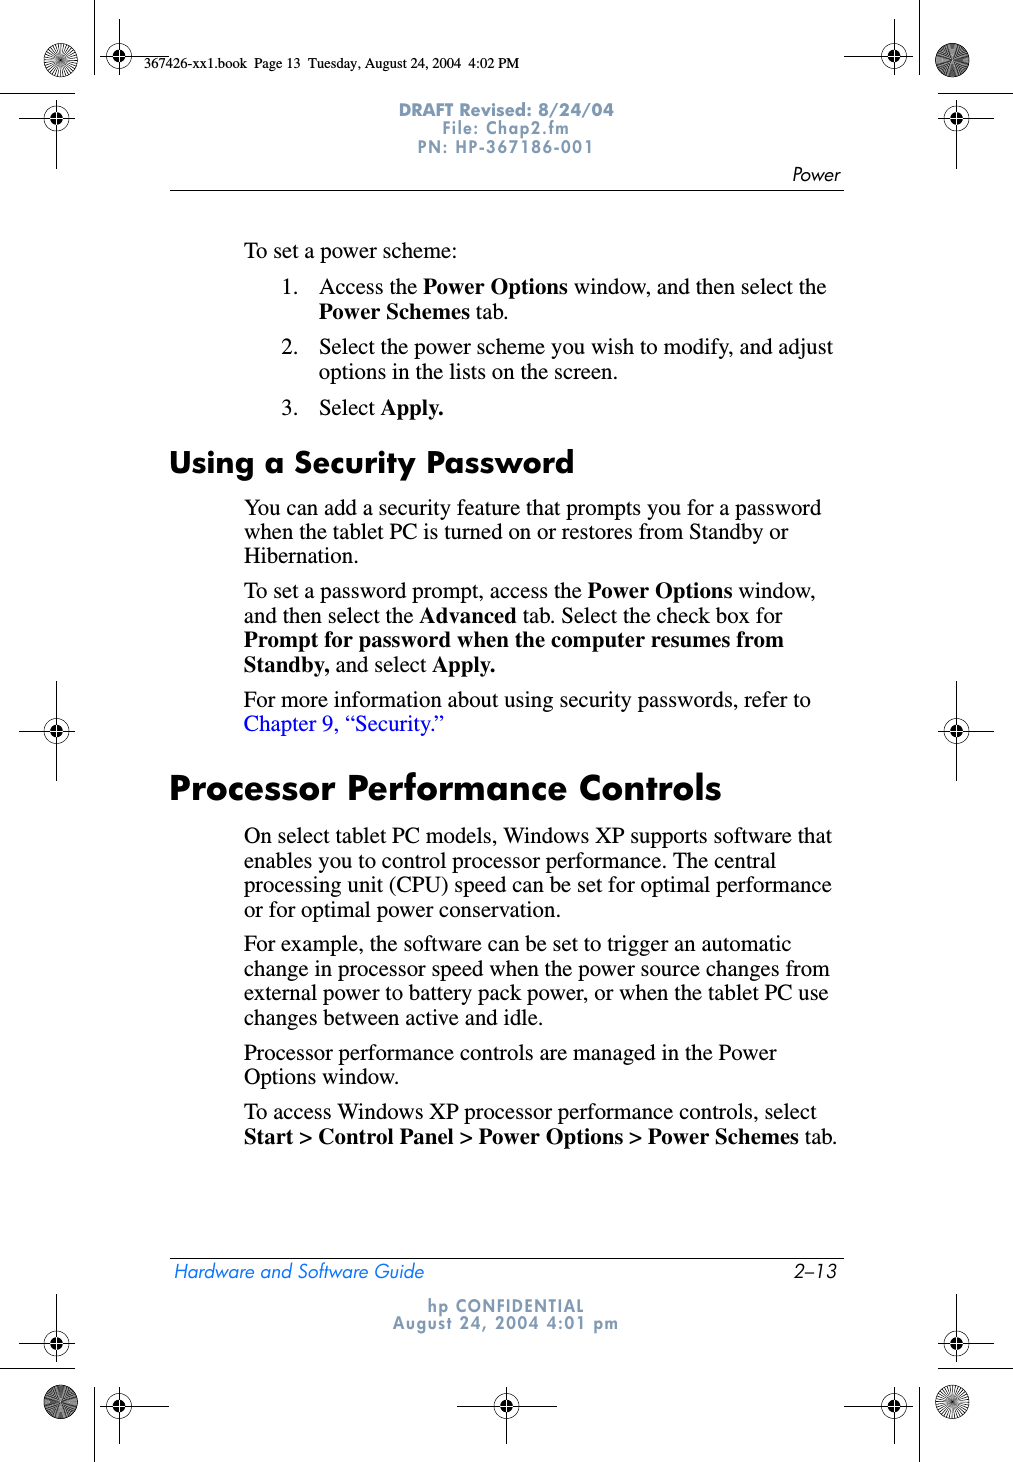 PowerHardware and Software Guide 2–13DRAFT Revised: 8/24/04File: Chap2.fm PN: HP-367186-001 hp CONFIDENTIALAugust 24, 2004 4:01 pmTo set a power scheme:1. Access the Power Options window, and then select the Power Schemes tab.2. Select the power scheme you wish to modify, and adjust options in the lists on the screen.3. Select Apply.Using a Security PasswordYou can add a security feature that prompts you for a password when the tablet PC is turned on or restores from Standby or Hibernation.To set a password prompt, access the Power Options window, and then select the Advanced tab. Select the check box for Prompt for password when the computer resumes from Standby, and select Apply.For more information about using security passwords, refer to Chapter 9, “Security.”Processor Performance ControlsOn select tablet PC models, Windows XP supports software that enables you to control processor performance. The central processing unit (CPU) speed can be set for optimal performance or for optimal power conservation.For example, the software can be set to trigger an automatic change in processor speed when the power source changes from external power to battery pack power, or when the tablet PC use changes between active and idle.Processor performance controls are managed in the Power Options window.To access Windows XP processor performance controls, select Start &gt; Control Panel &gt; Power Options &gt; Power Schemes tab.367426-xx1.book  Page 13  Tuesday, August 24, 2004  4:02 PM